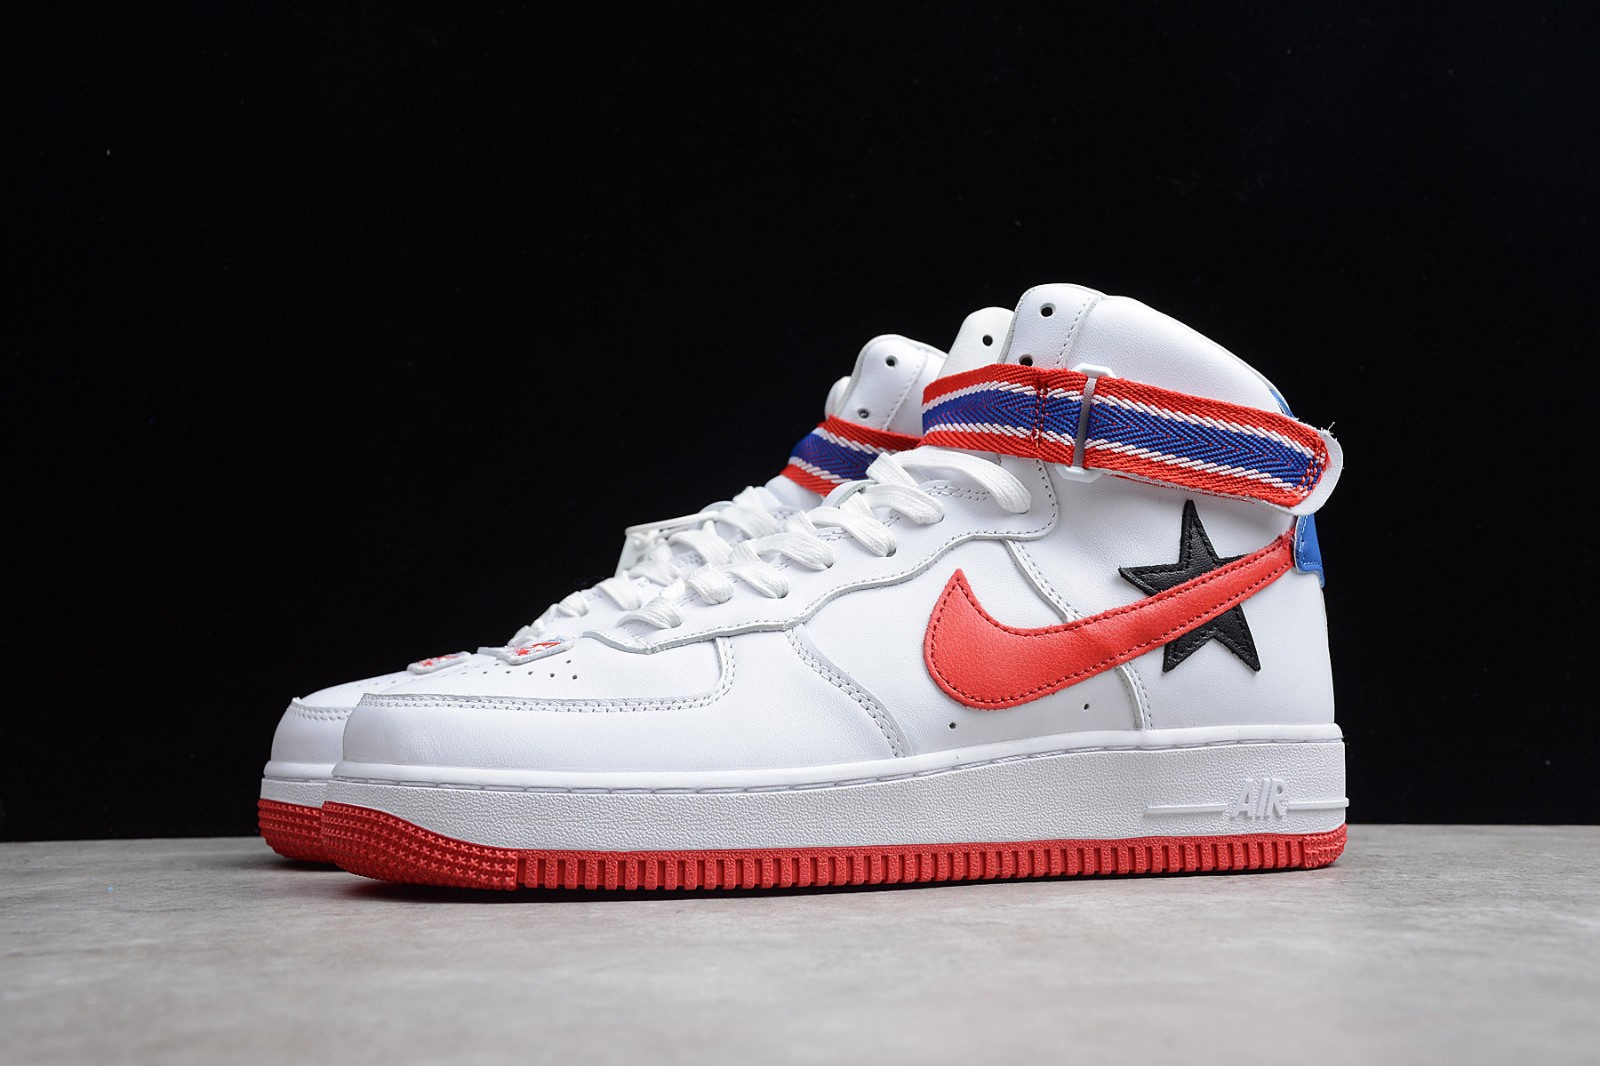 100 - Riccardo Tisci x NikeLab Air Force 1 High Besotted